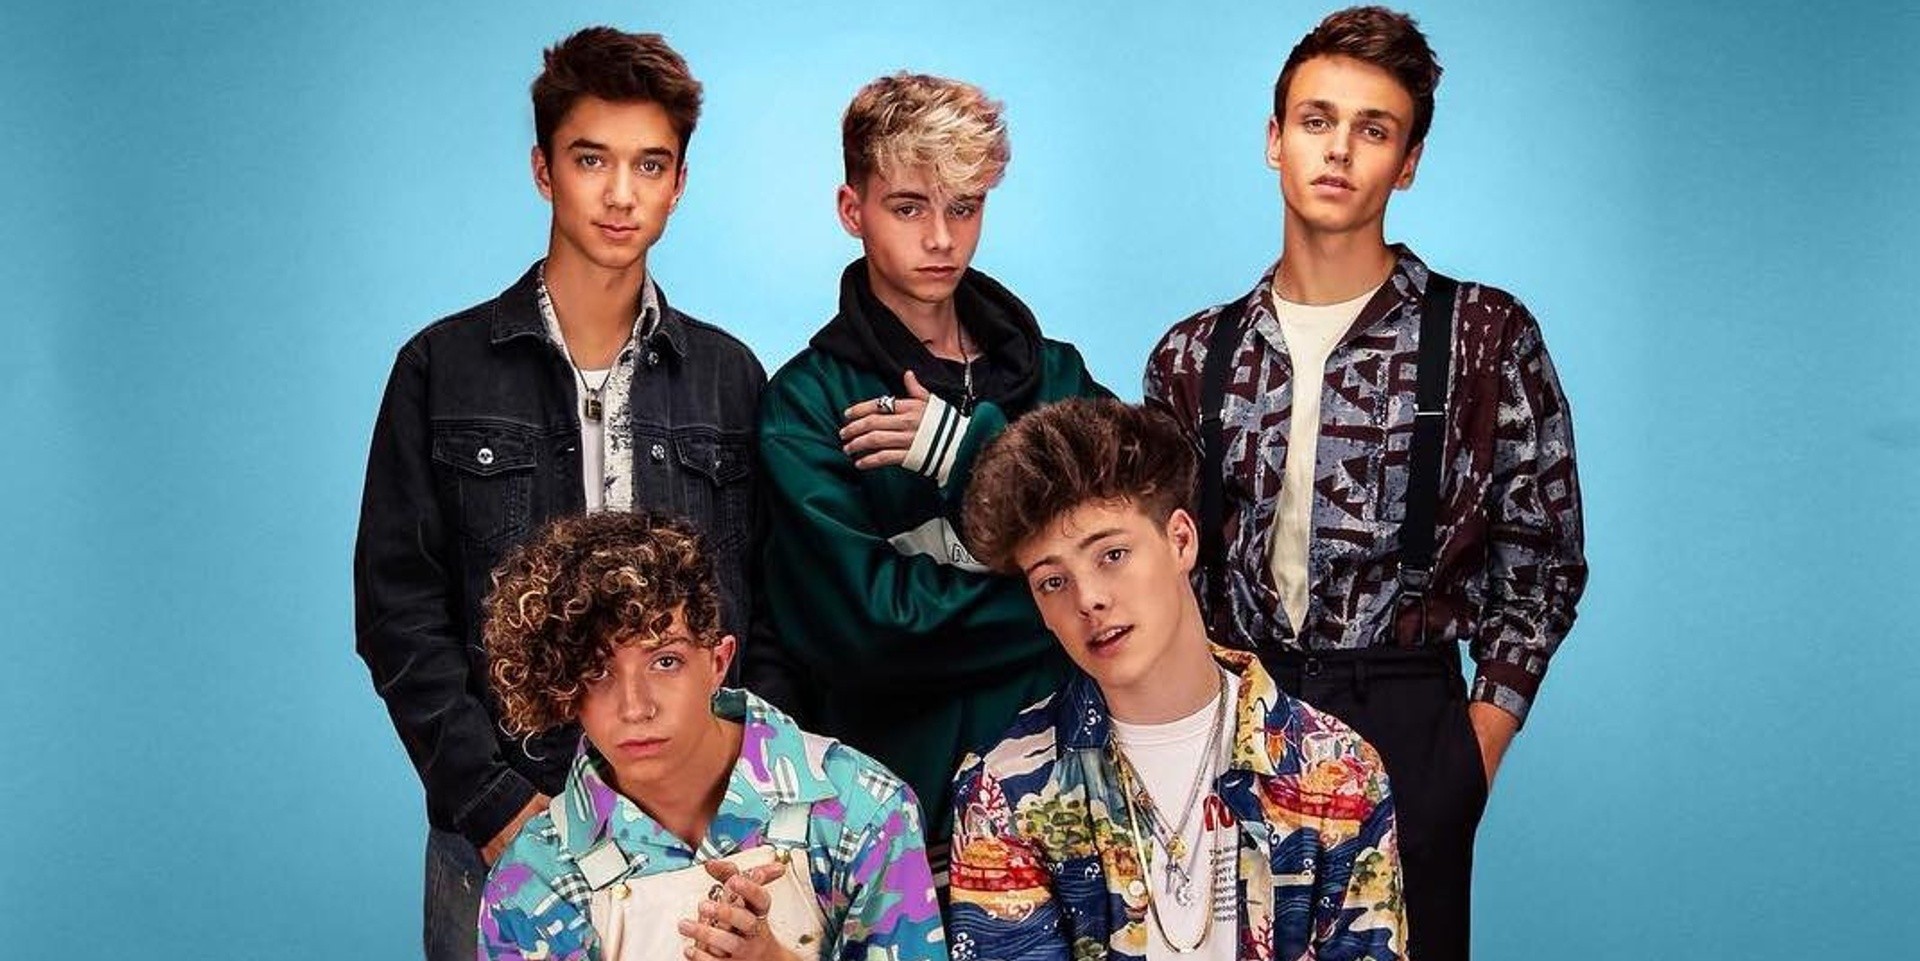 Why Don't We to perform in Singapore this November